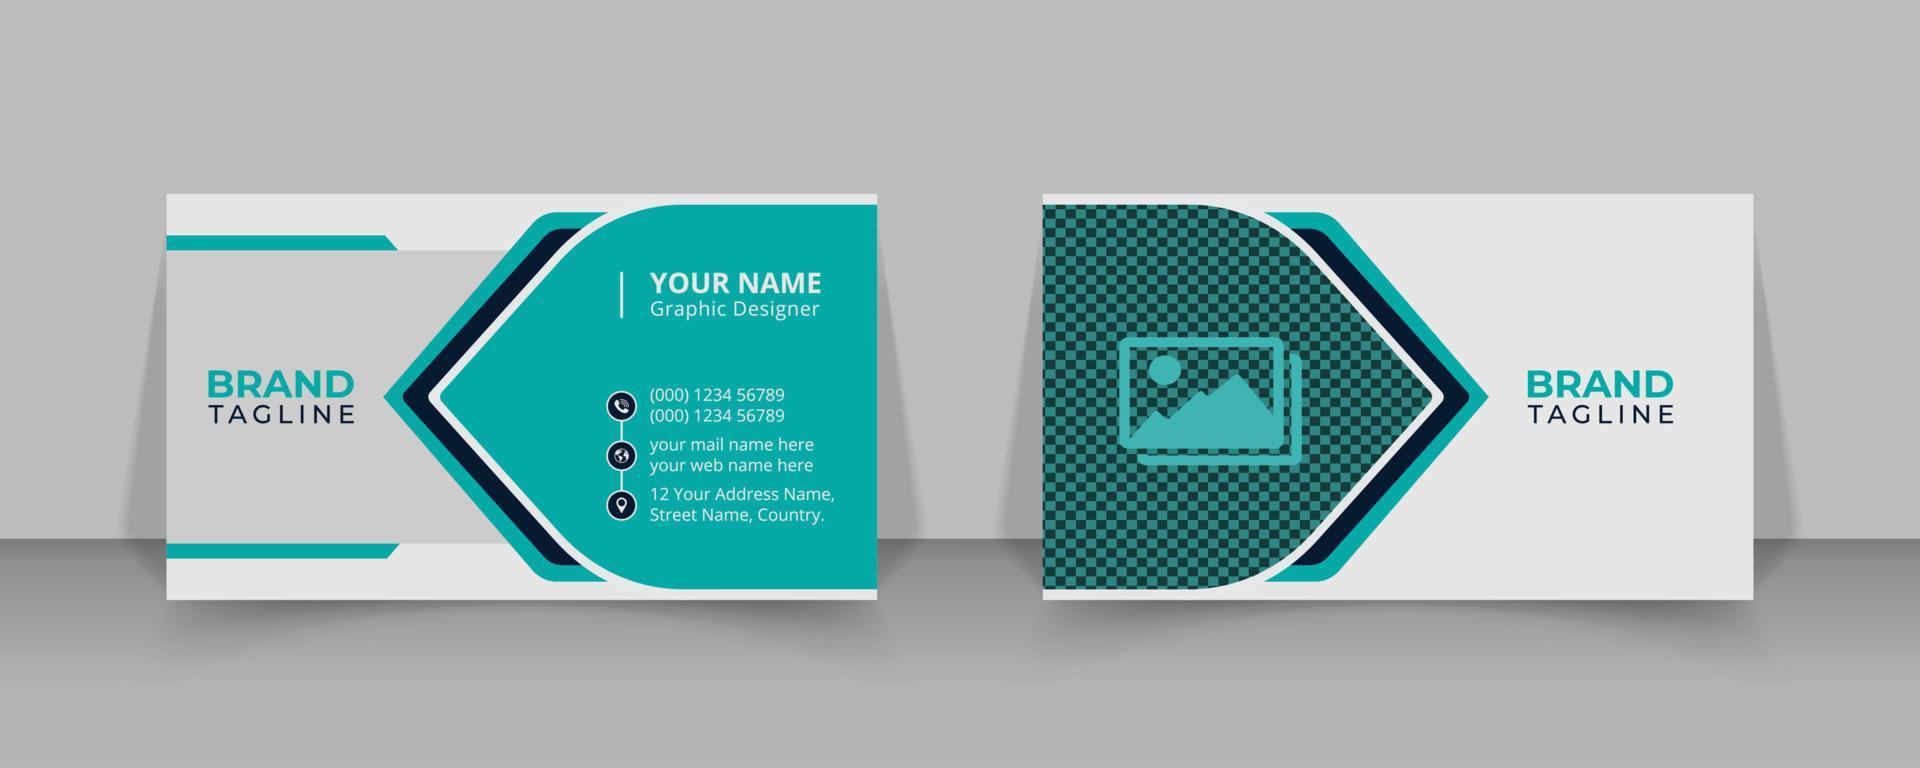 Modern business card design template for infographics vector